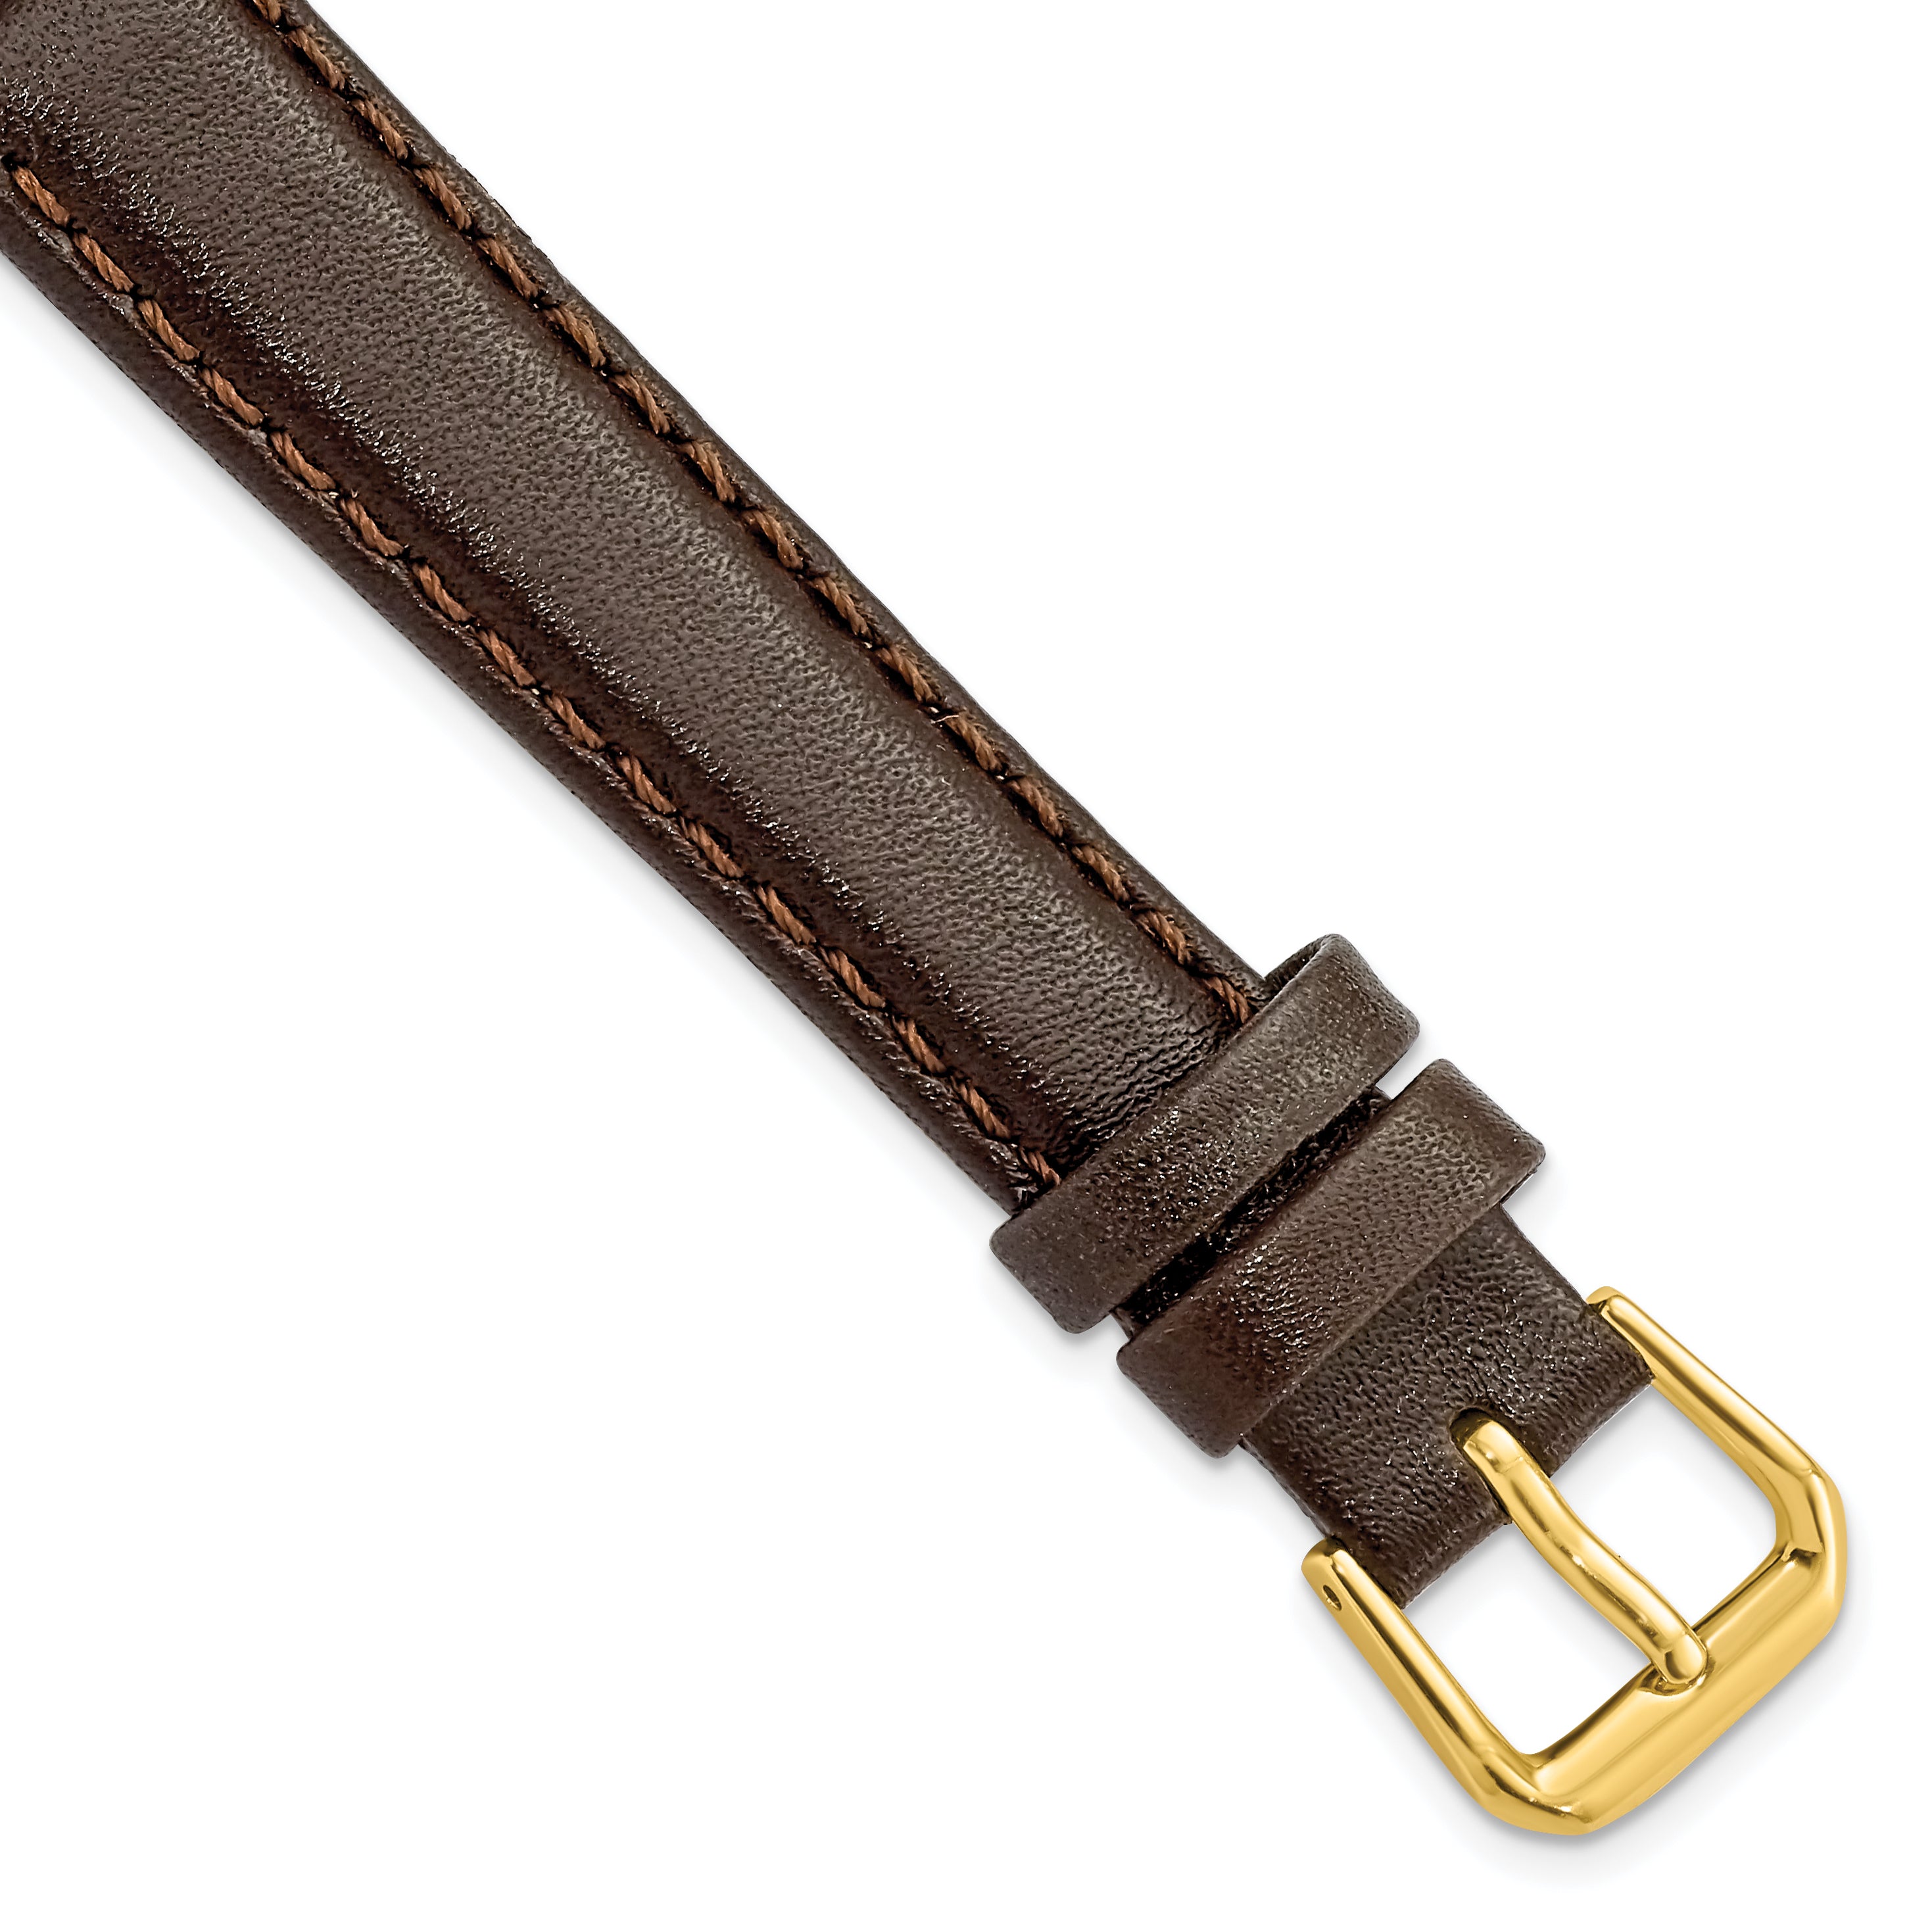 DeBeer 14mm Long Dark Brown Smooth Leather with Gold-tone Buckle 7.5 inch Watch Band